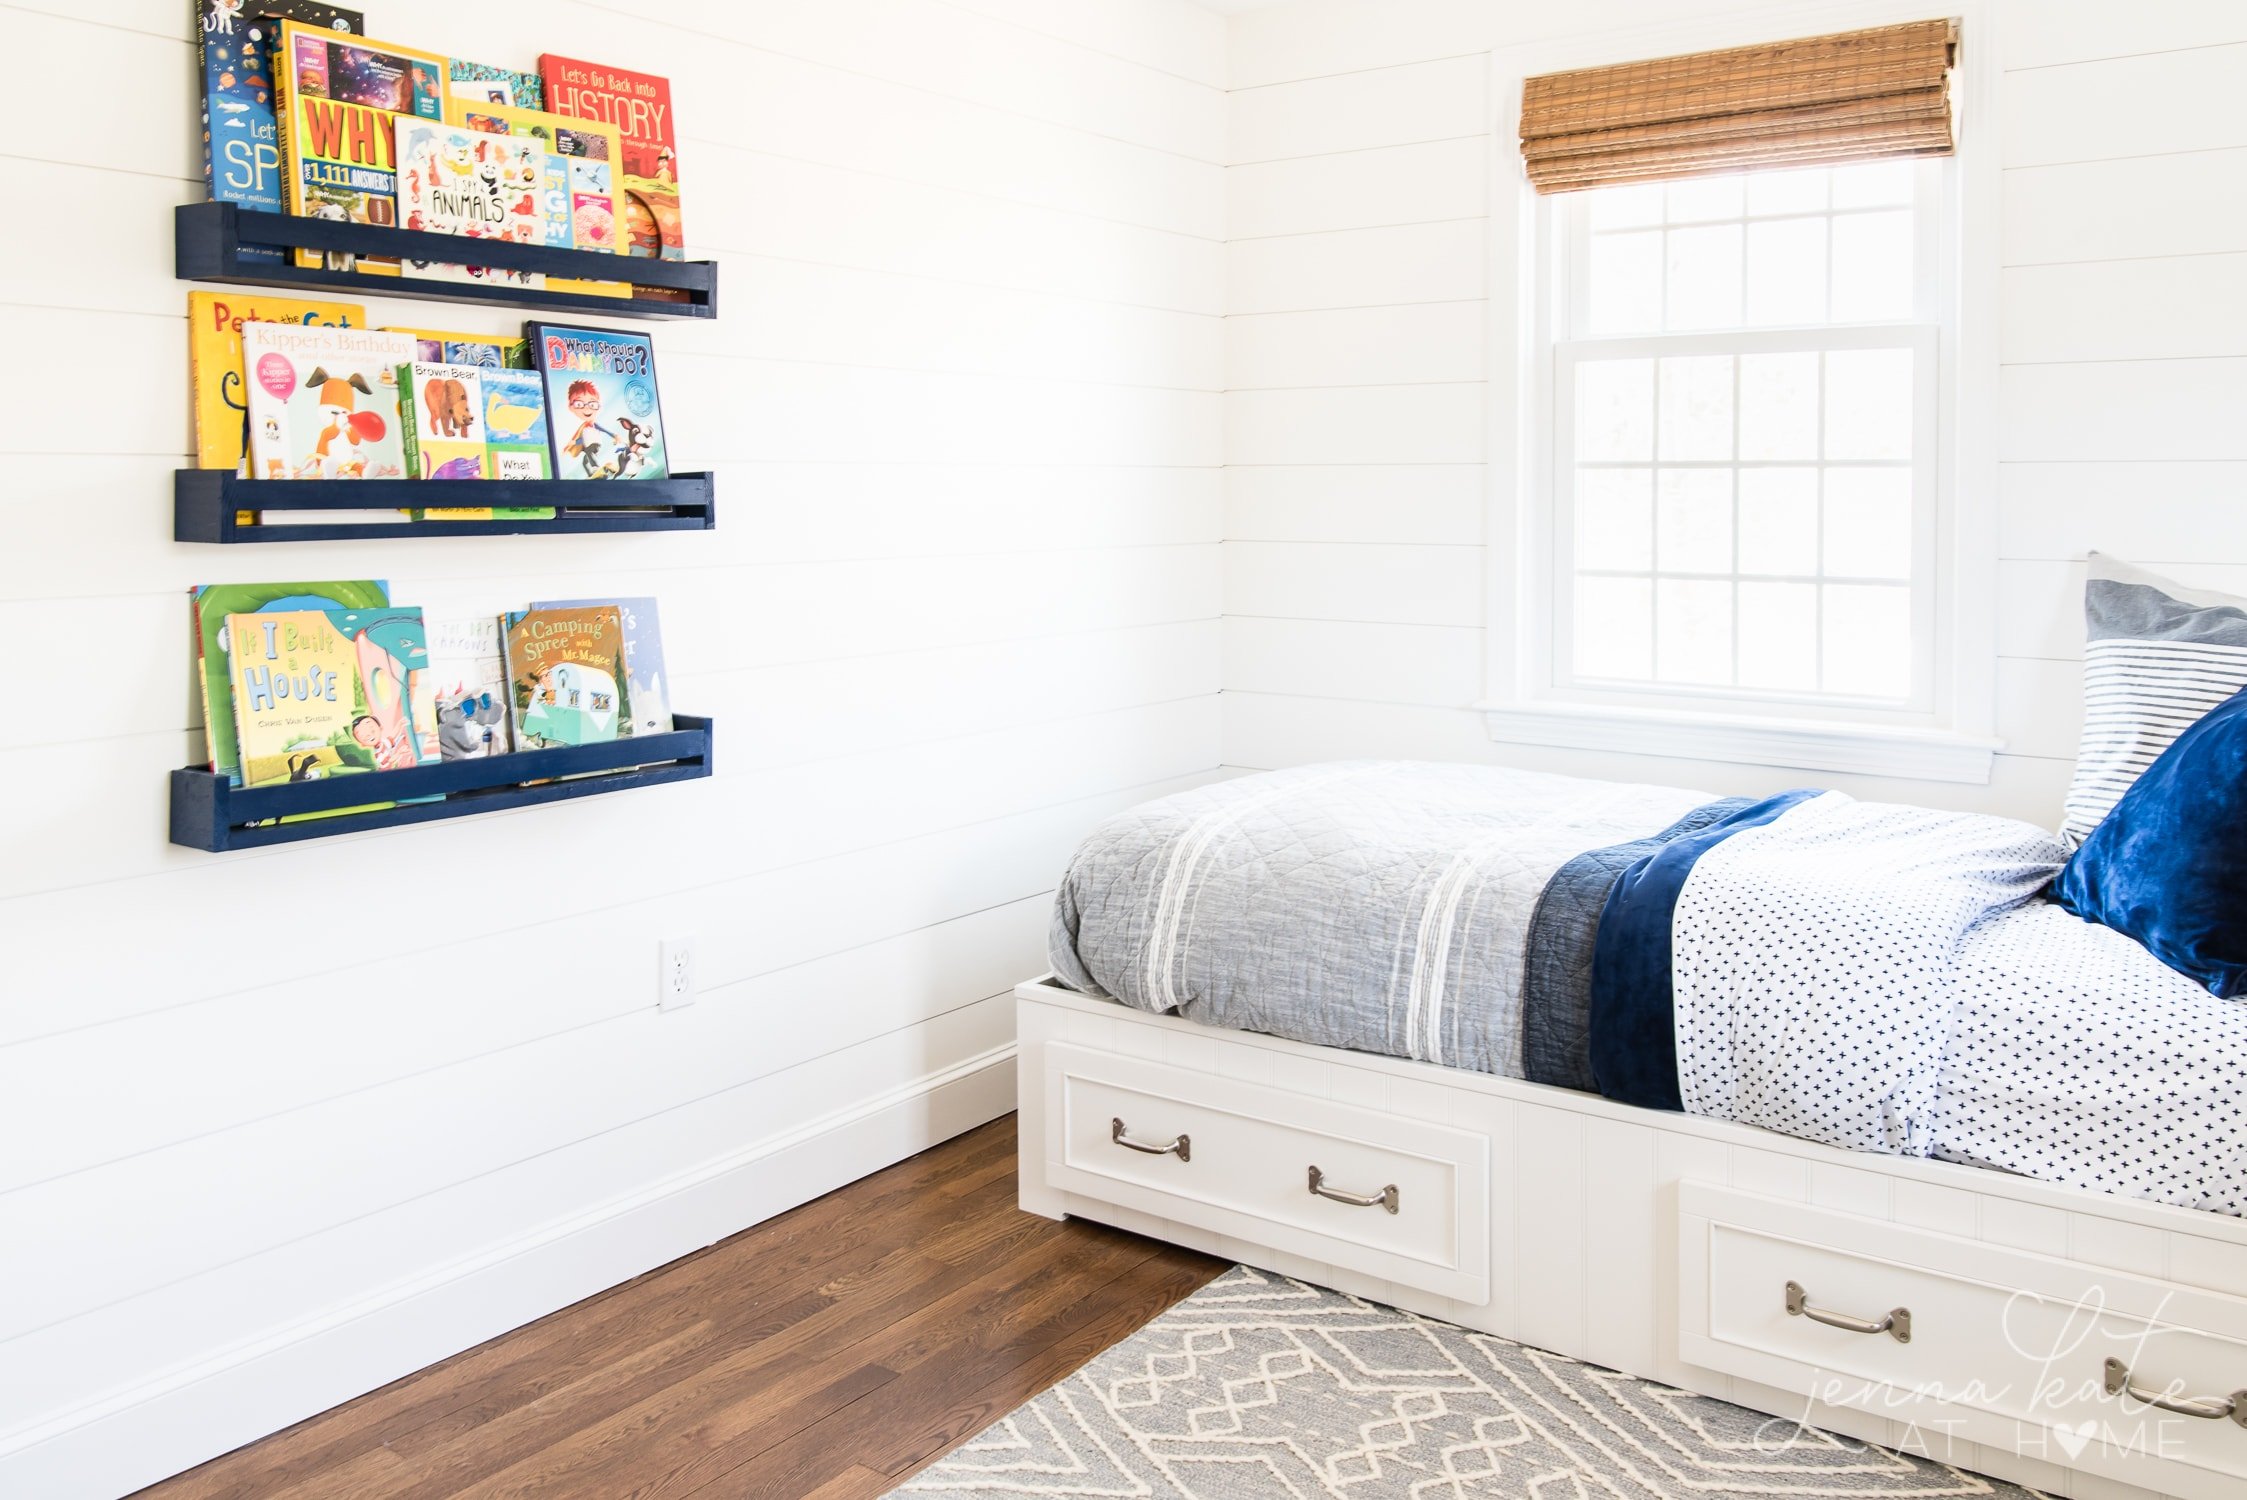 shiplap walls in a boys bedroom painted BM simply white in a matte finish